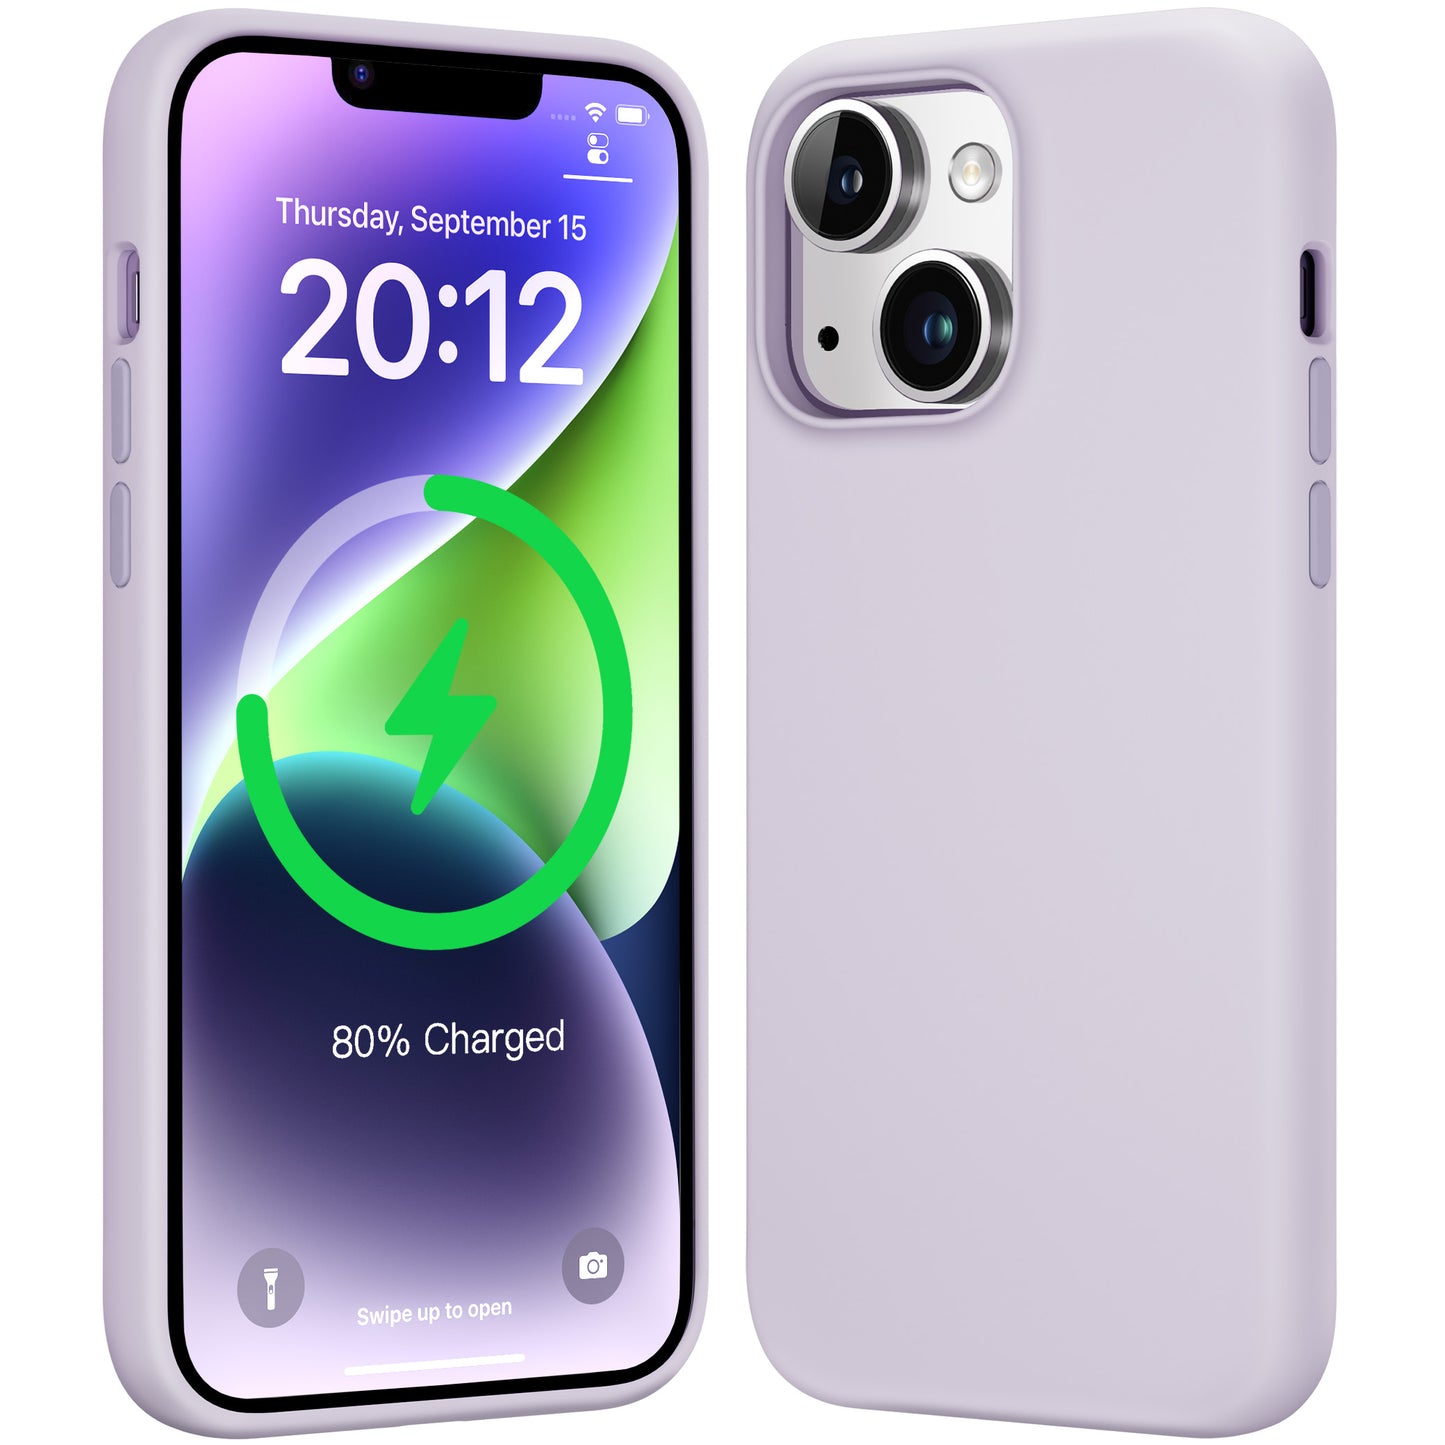 Show Off Your iPhone's Colors With The Liquid Silicone Case